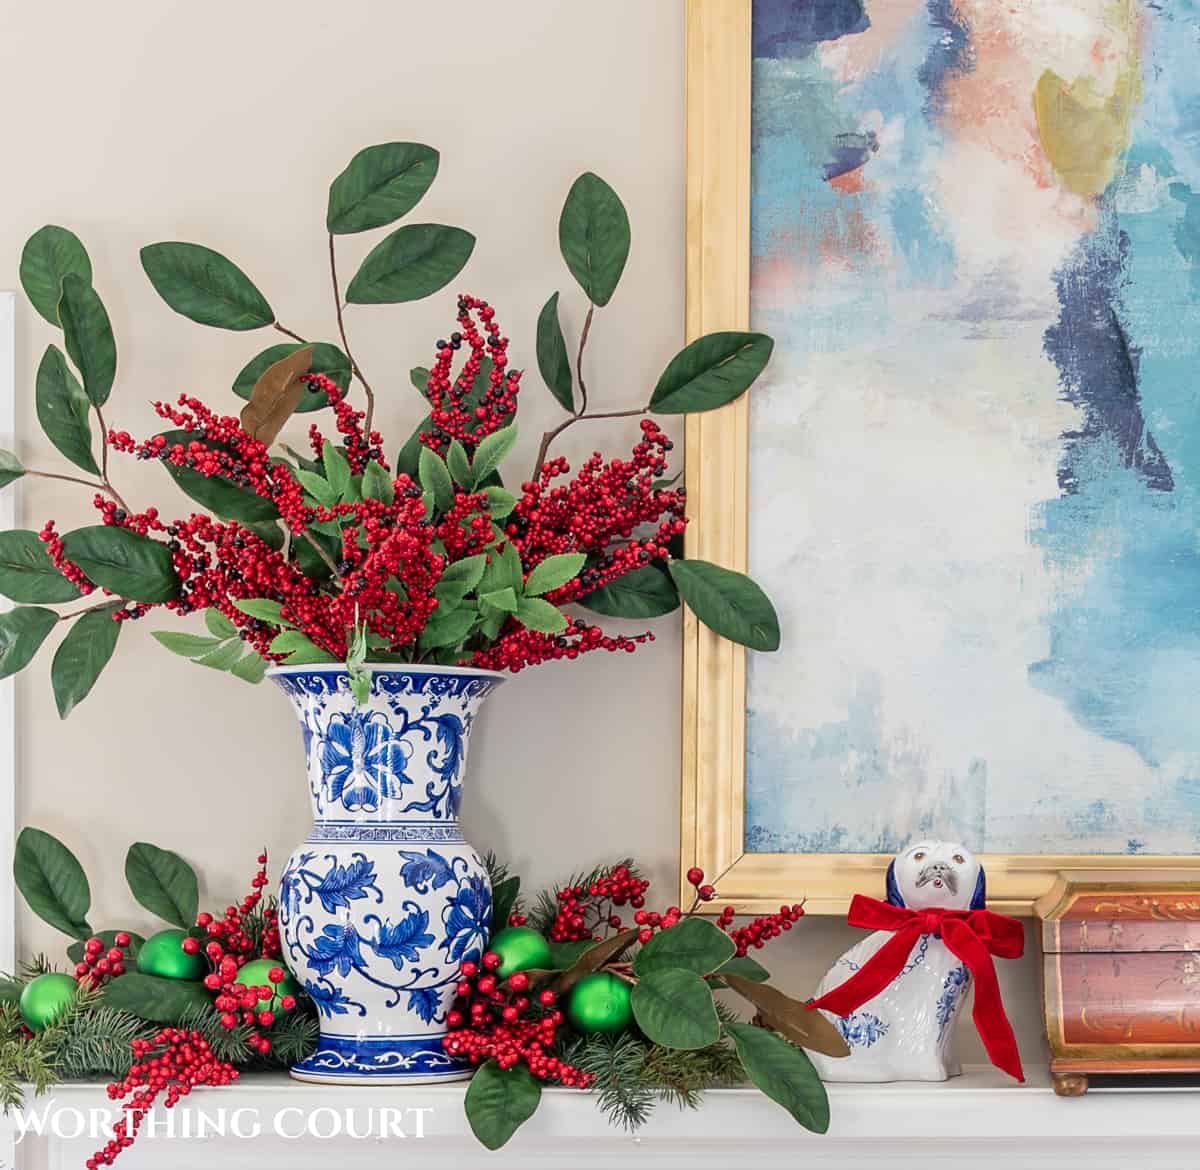 fireplace mantel with abstract art above and traditional Christmas decorations mixed with chinoiserie decor items